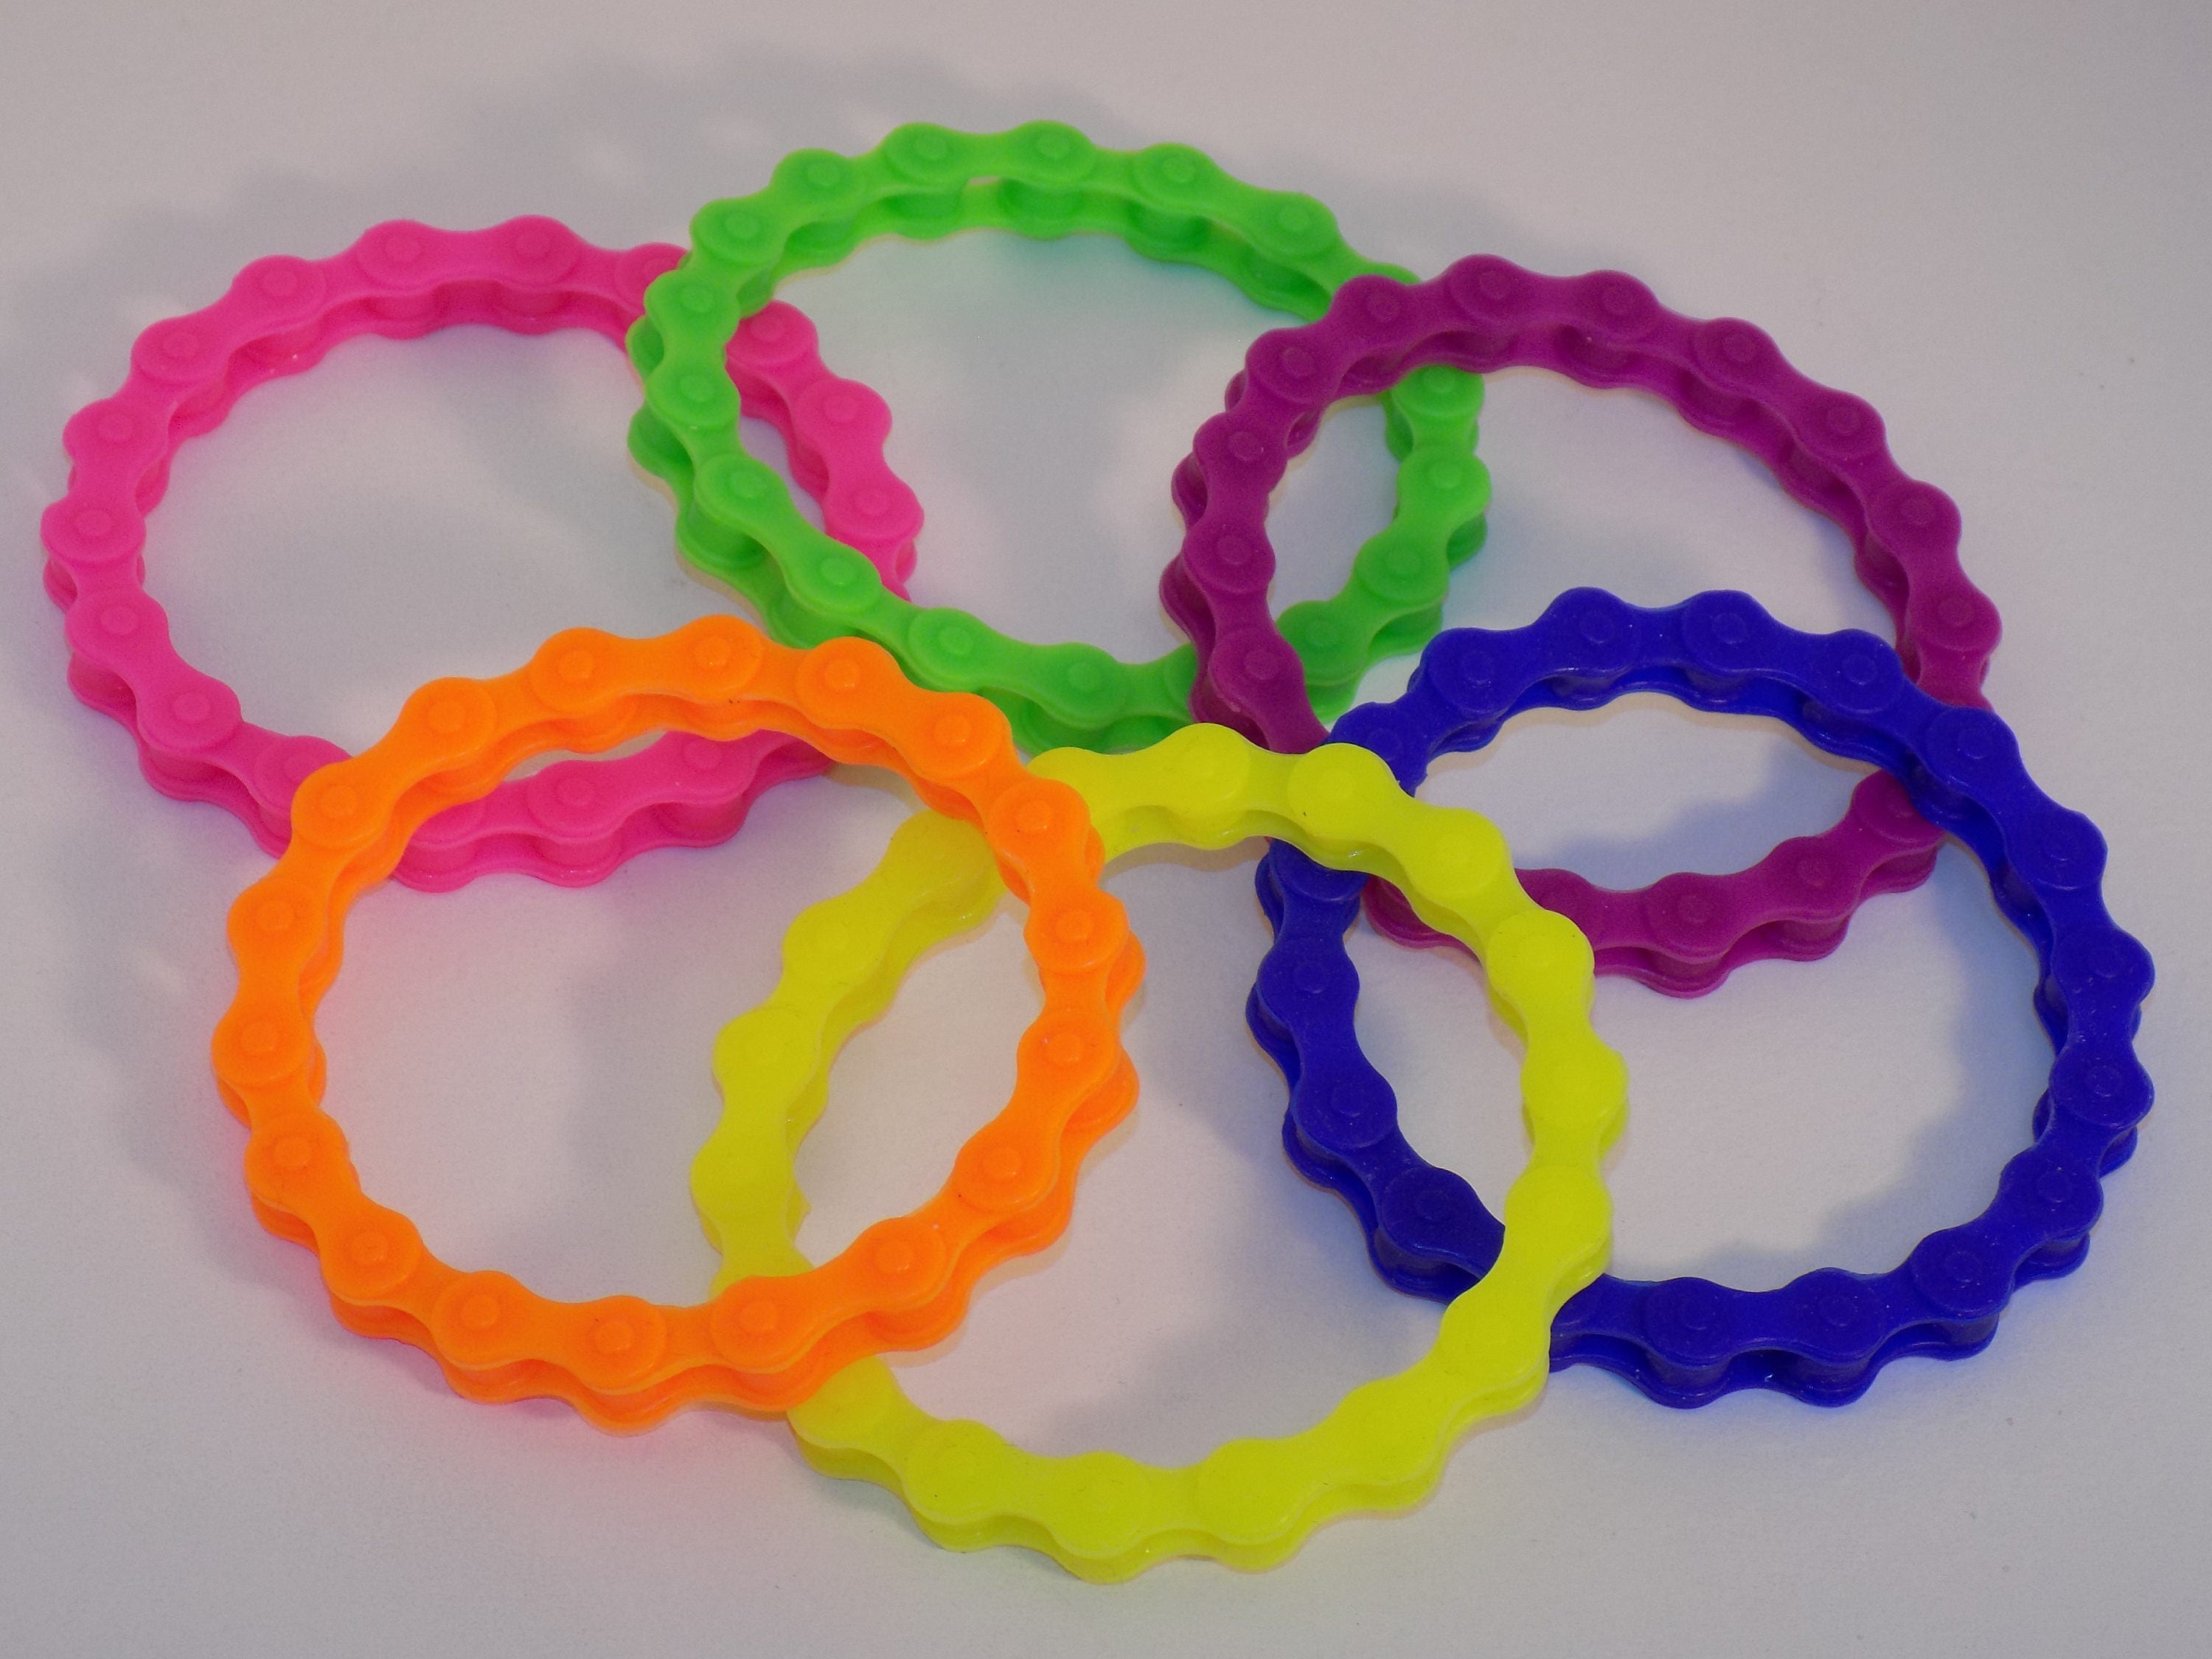 Buy Colored Bicycle Chain Silicone Stretchy Rubber Bracelet Online in India   Etsy